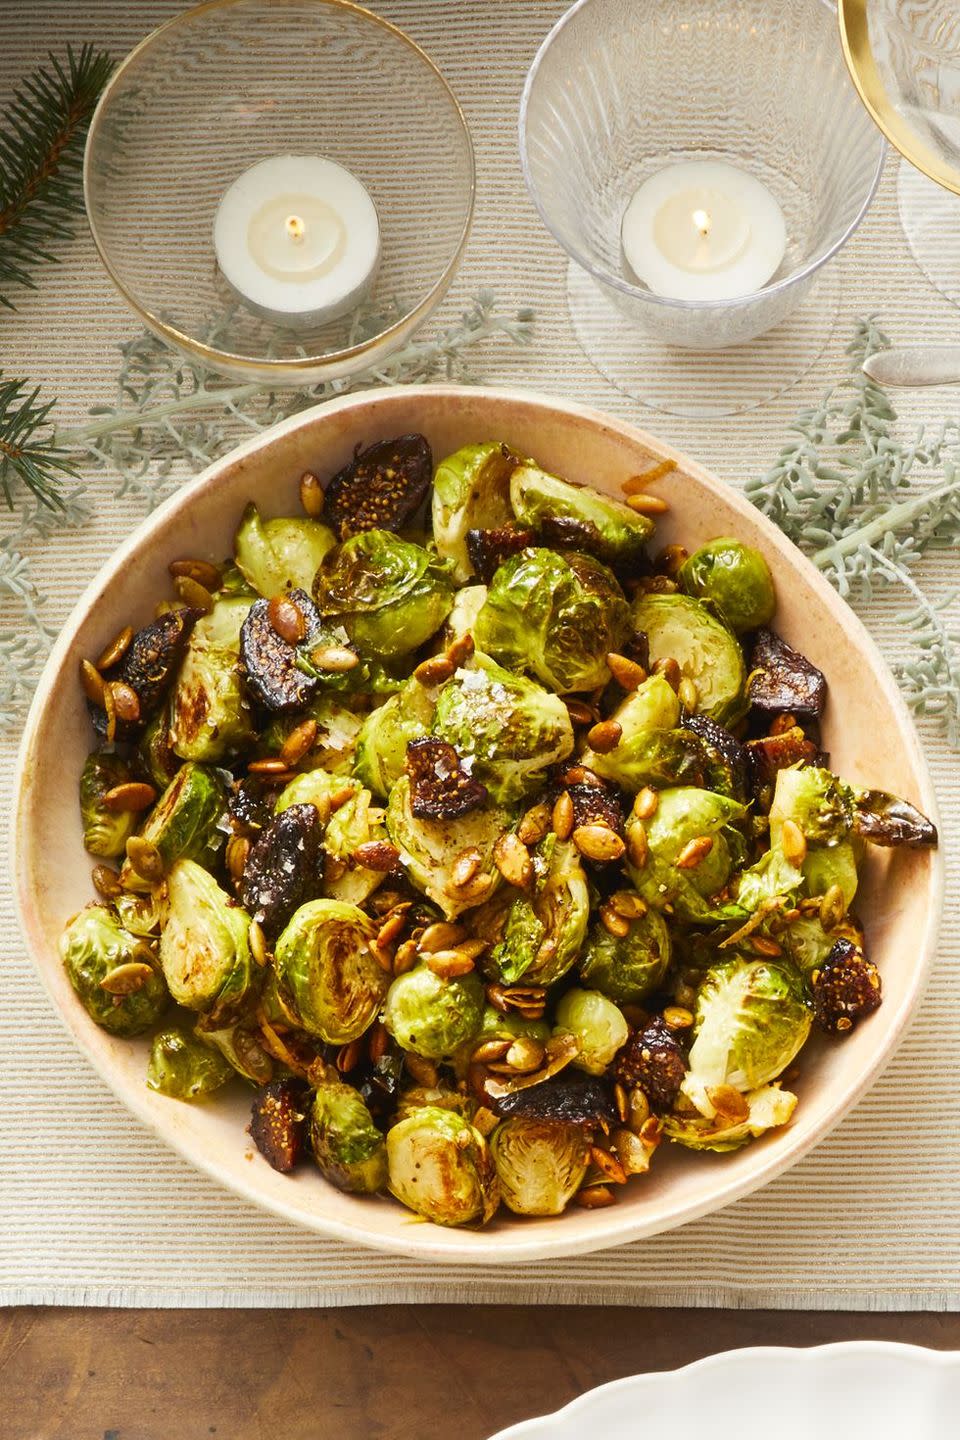 <p>Figs bring a natural sweetness this sprout side. </p><p>Get the <a href="https://www.goodhousekeeping.com/food-recipes/healthy/a25323337/brussels-sprouts-with-pepitas-and-figs-recipe/" rel="nofollow noopener" target="_blank" data-ylk="slk:Brussels Sprouts with Pepitas and Figs recipe" class="link "><strong>Brussels Sprouts with Pepitas and Figs recipe</strong></a>.</p>